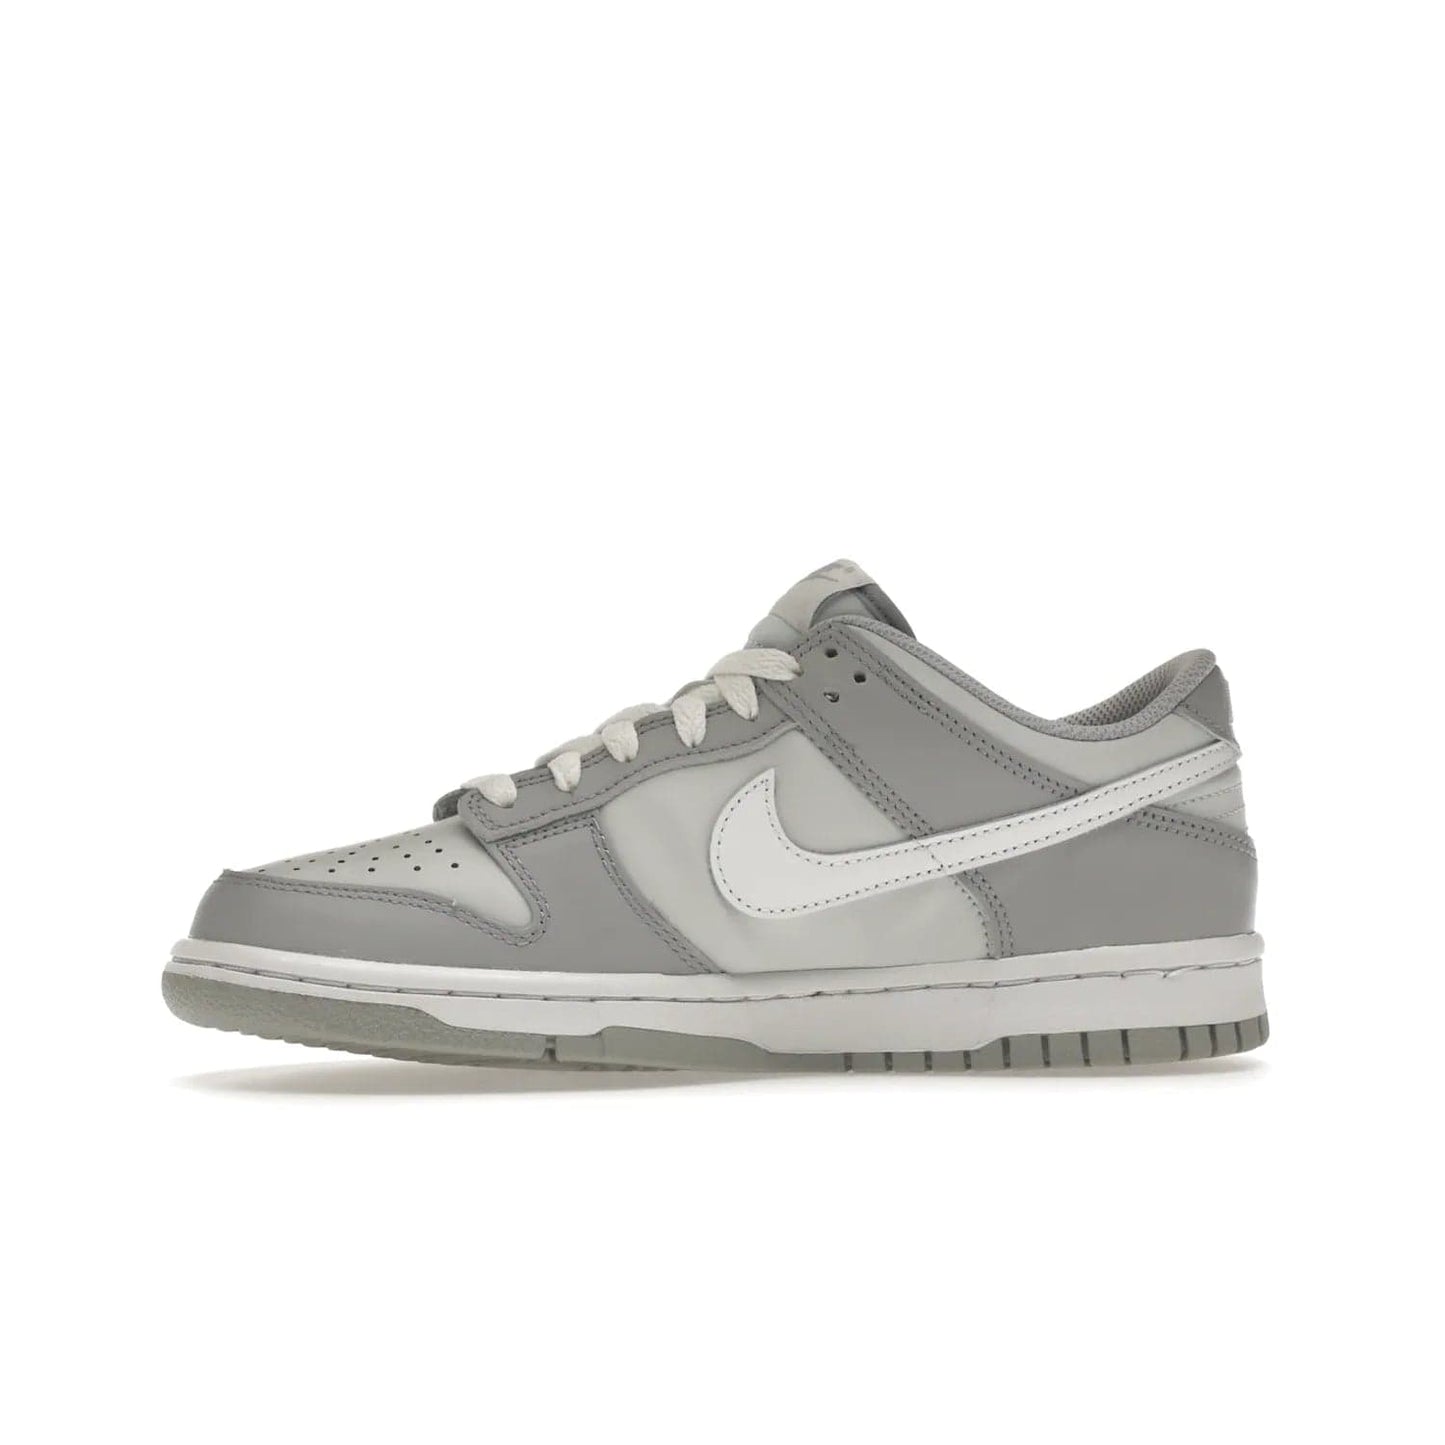 Nike Dunk Low Two-Toned Grey (GS) - Image 18 - Only at www.BallersClubKickz.com - Stylish Nike Dunk Low GS Two-Toned Grey featuring leather build, light/dark grey shades, white Swoosh logo & gray rubber outsole. Get ready to make a statement with this timeless classic released in March 2022.